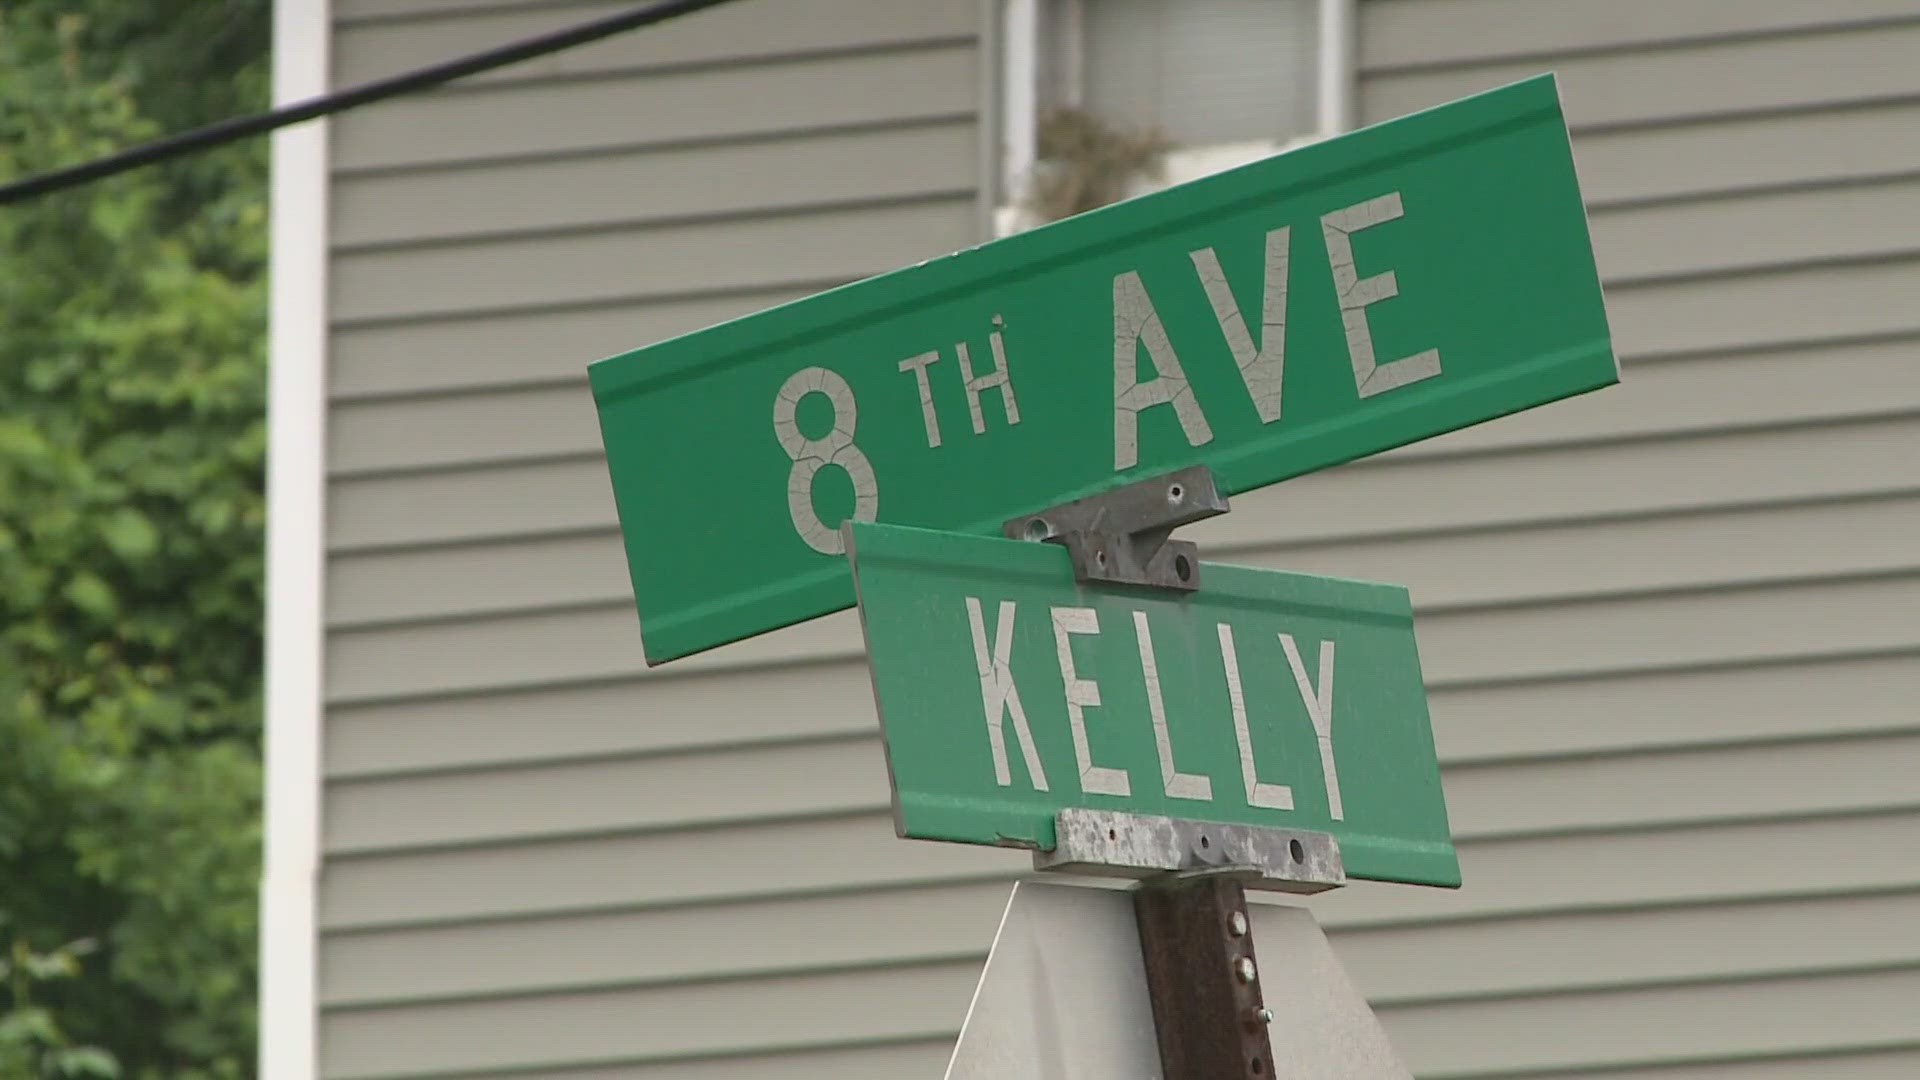 The deadly shooting in the area of 8th Avenue and Kelly Avenue happened after midnight on June 2. A total of 29 people were shot.